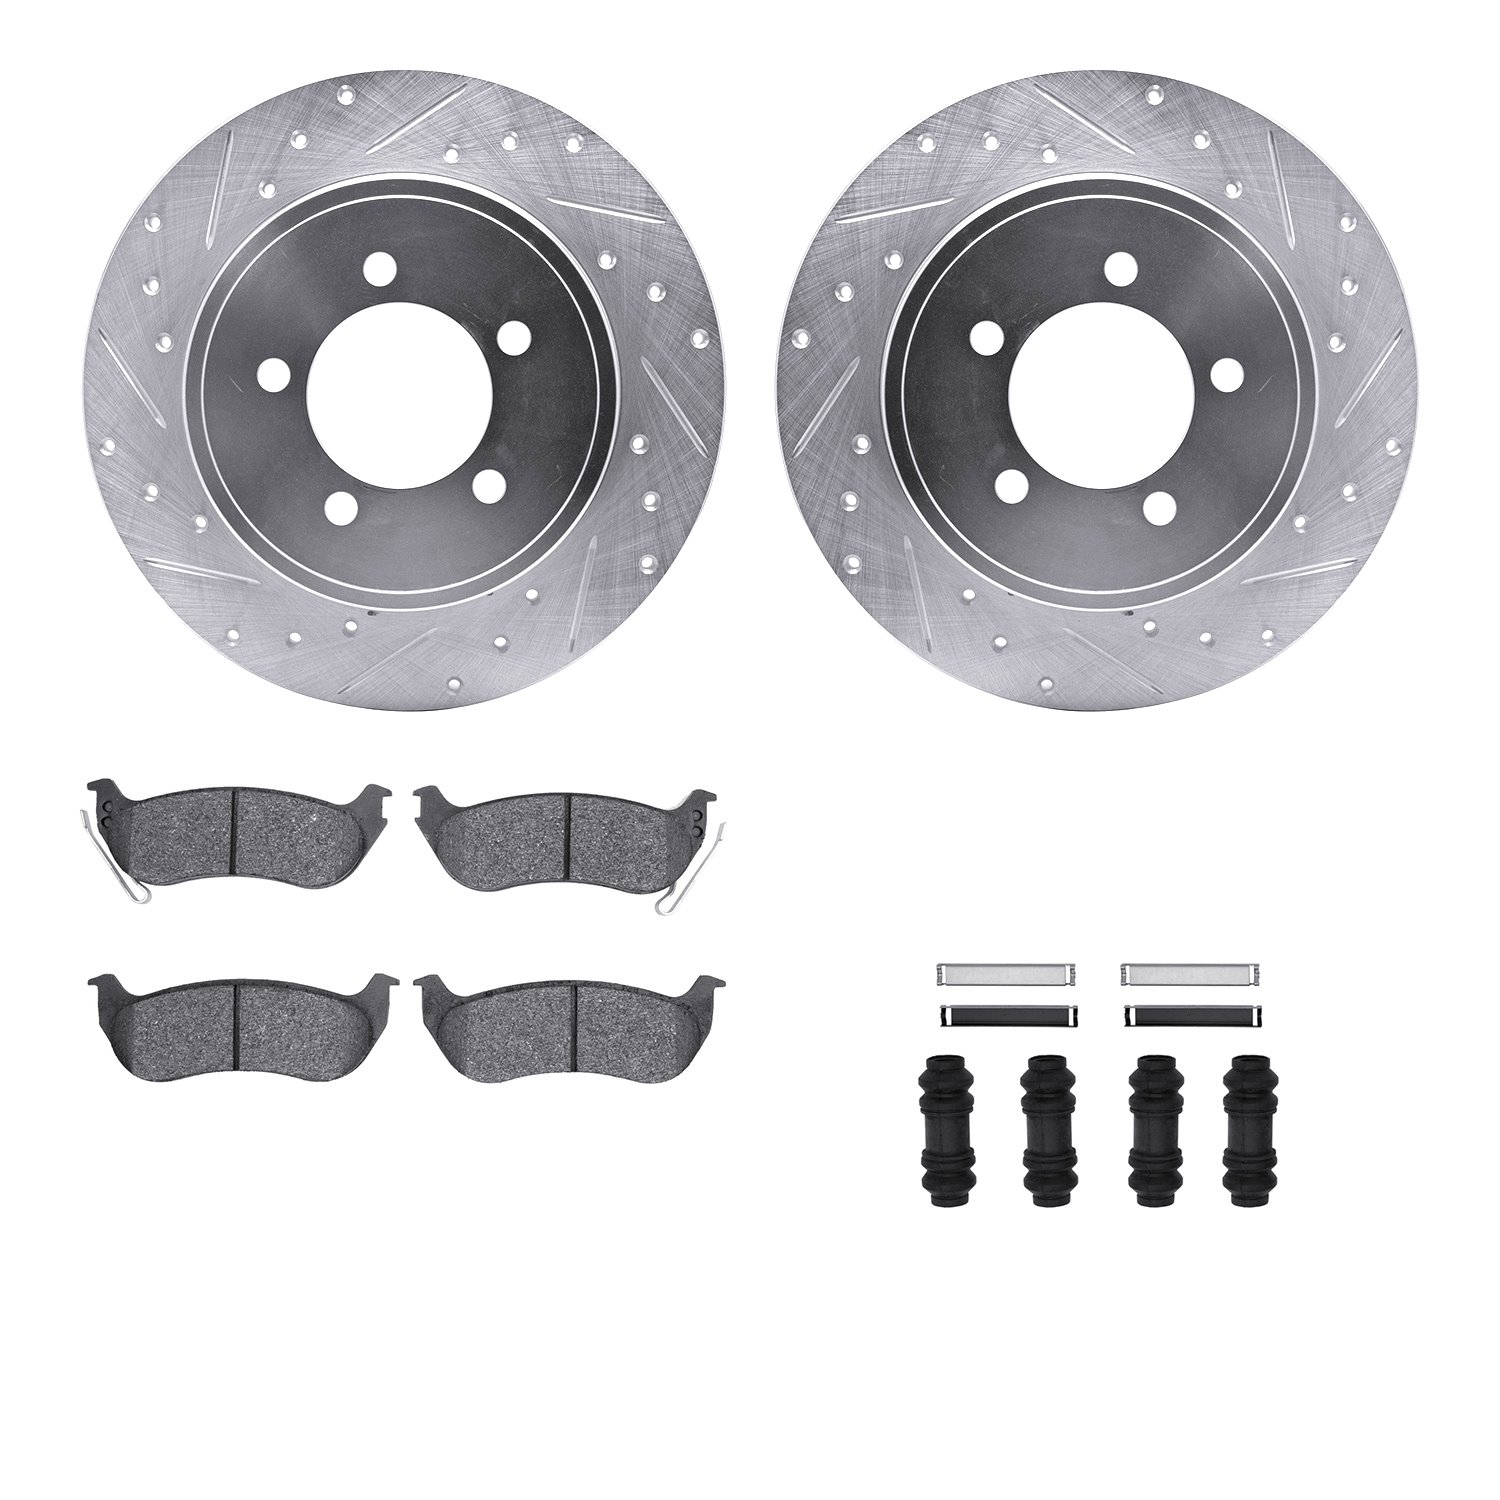 7212-54007 Drilled/Slotted Rotors w/Heavy-Duty Brake Pads Kit & Hardware [Silver], 2006-2010 Ford/Lincoln/Mercury/Mazda, Positio